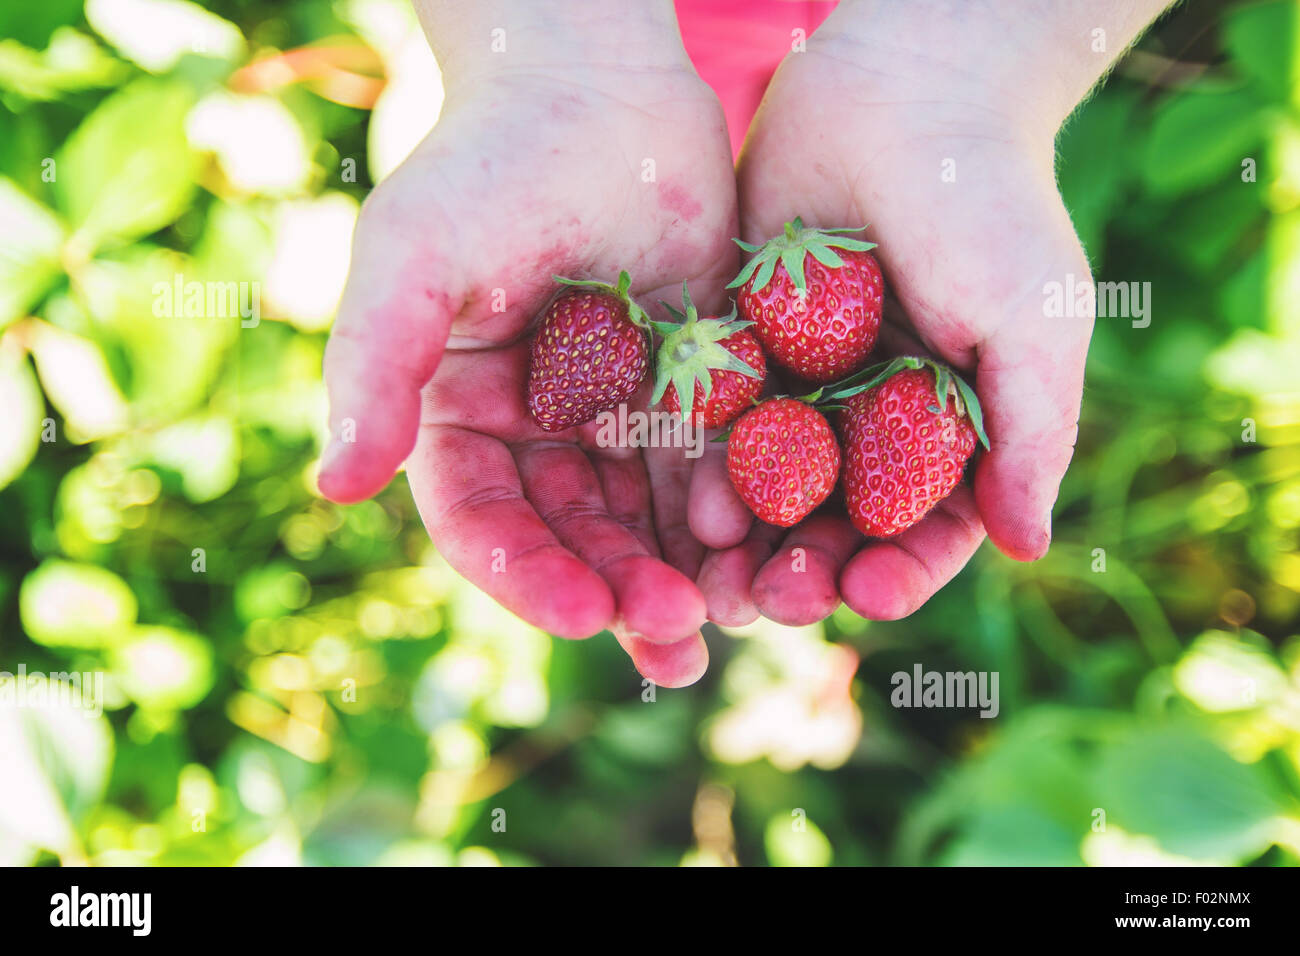 Close-up of a boy's stained hands holding freshly picked strawberries, USA Stock Photo